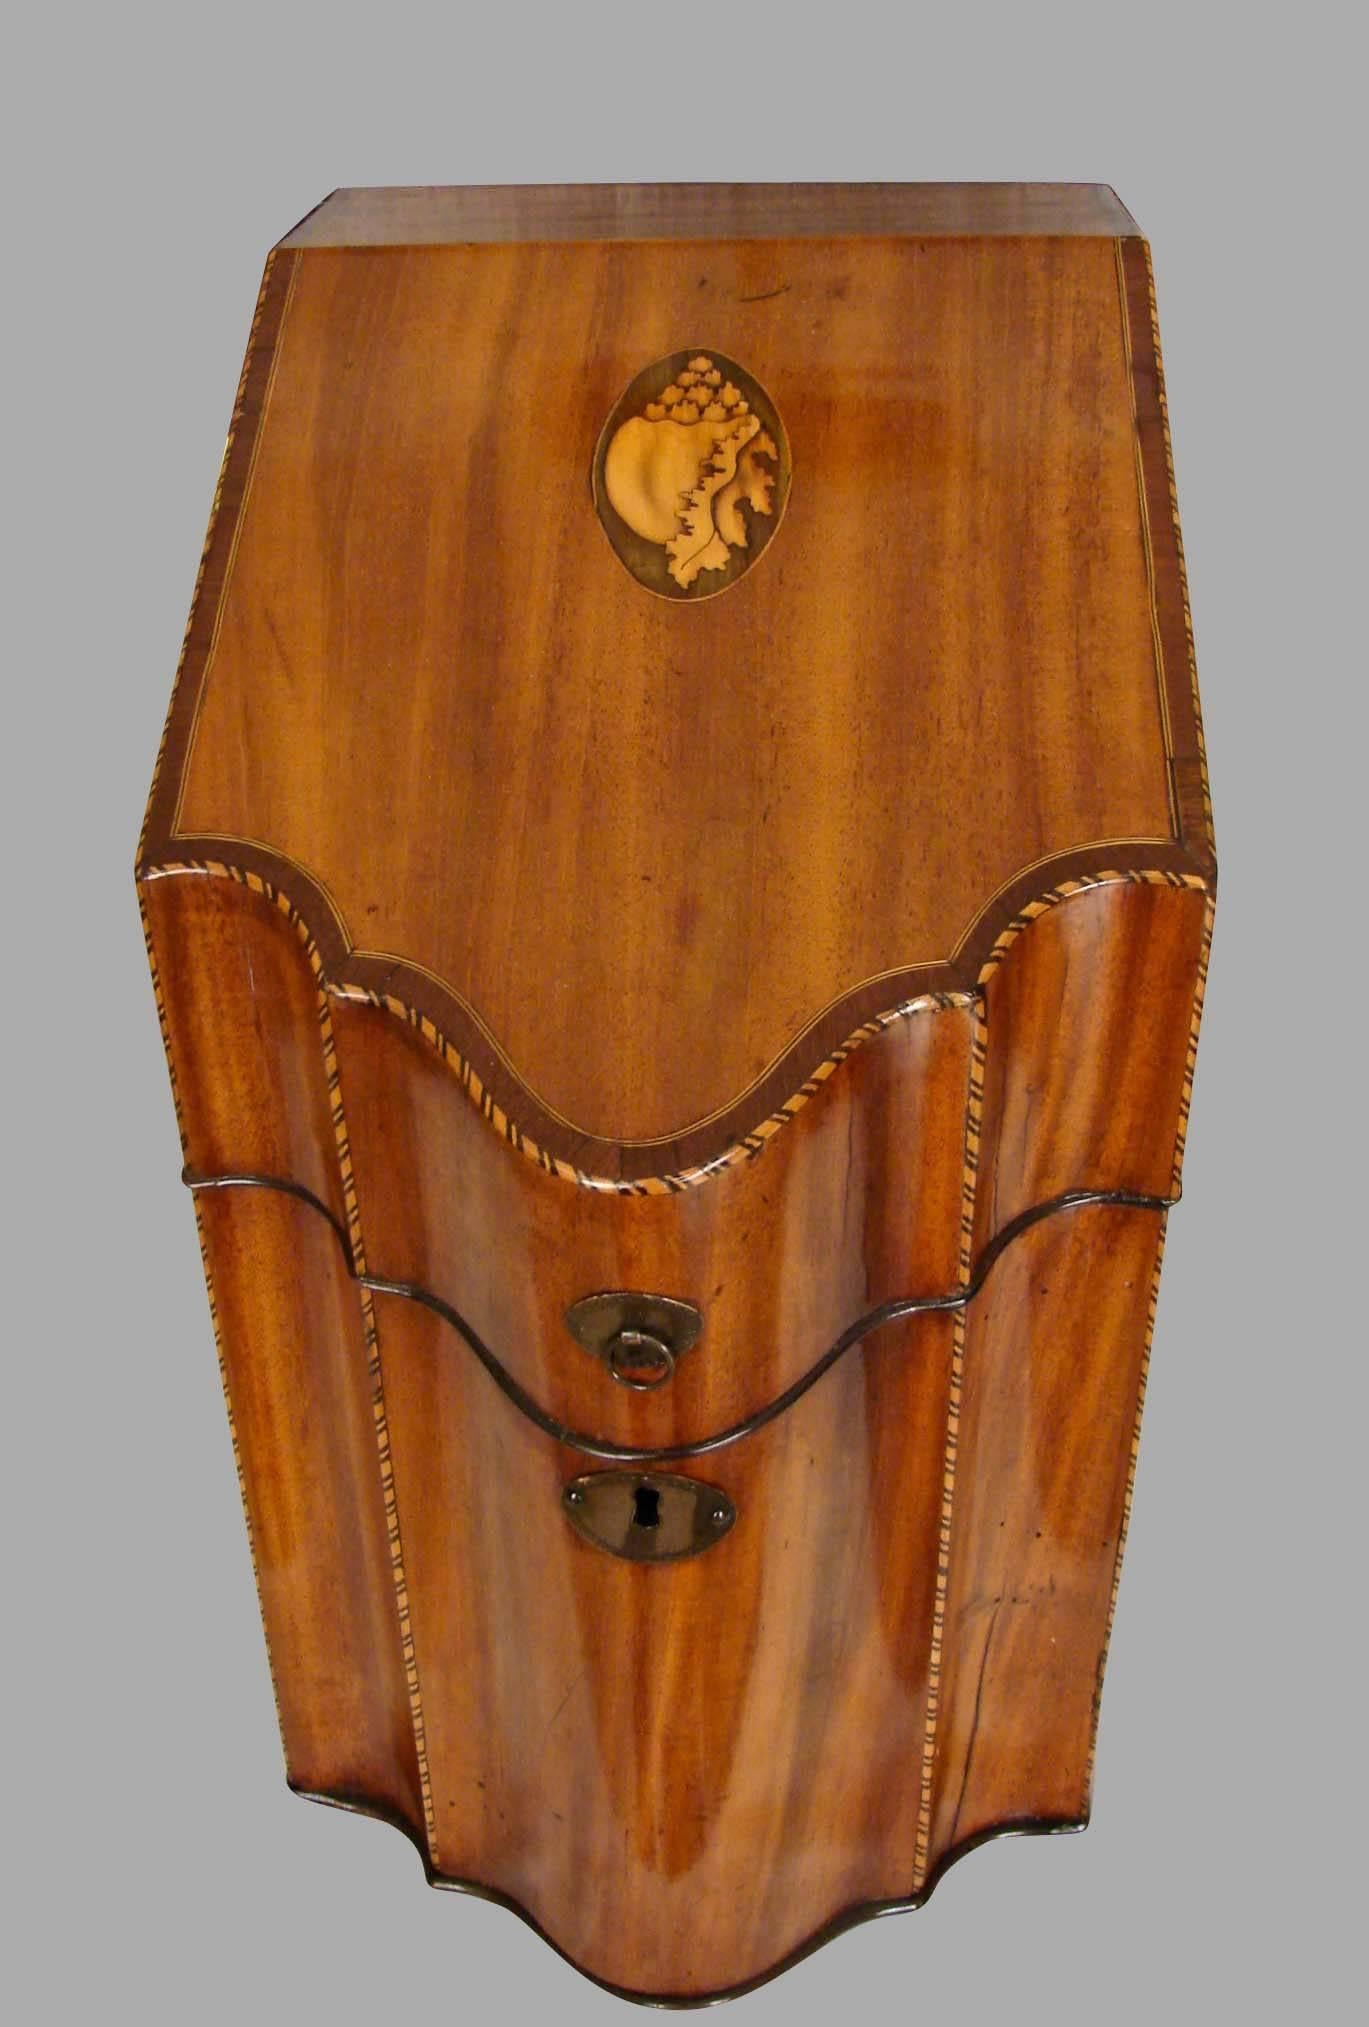 An English mahogany slant lid serpentine form cutlery box, the crossbanded top with inlaid boxwood conch shell decoration, an inlaid star on the underside of the lid, the interior retaining its original cutlery divides, the case with checkered